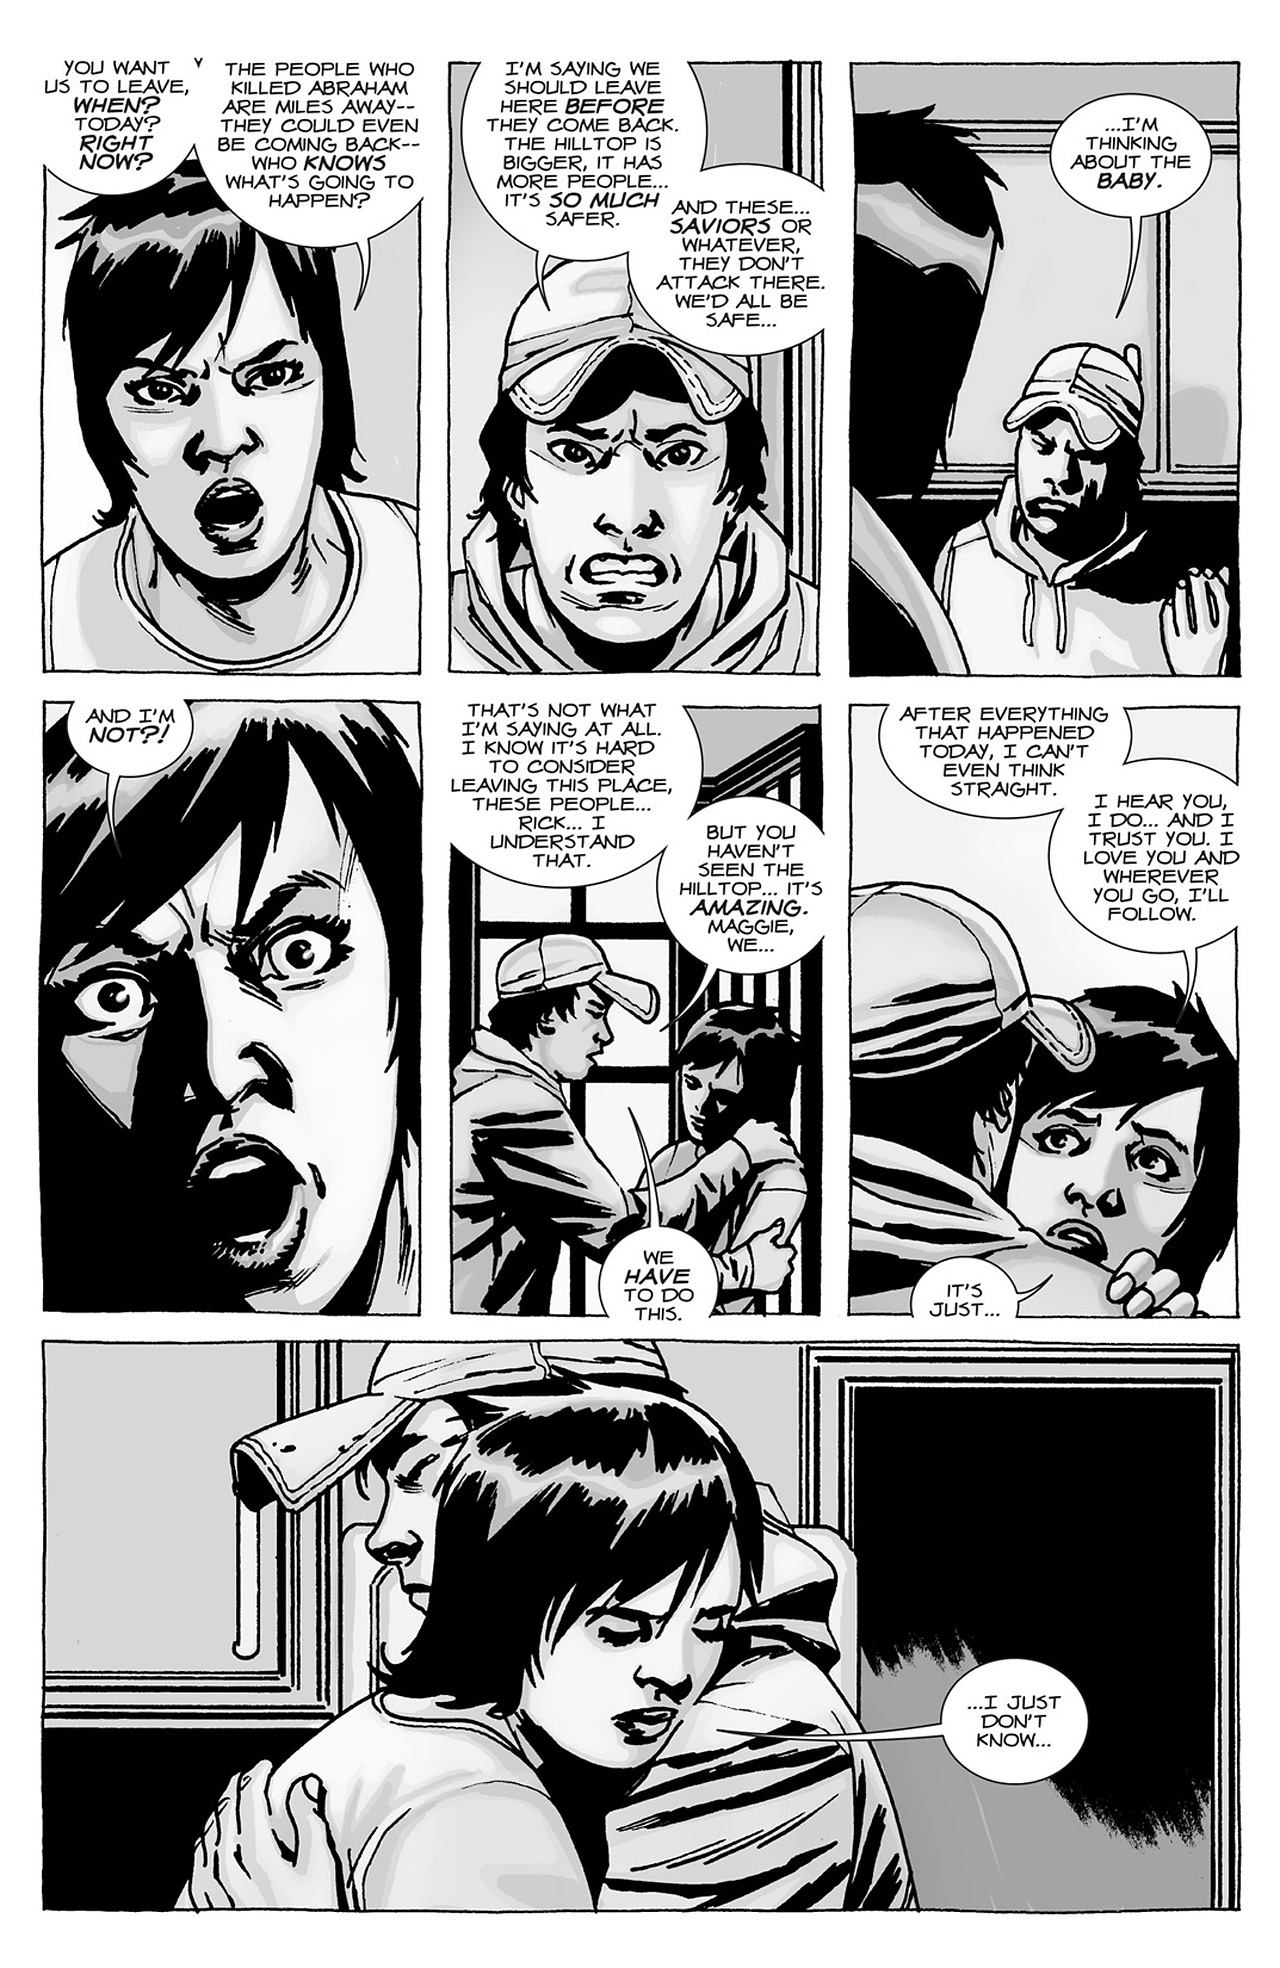 THE WALKING DEAD 99 - SOMETHING TO FEAR, Part Three